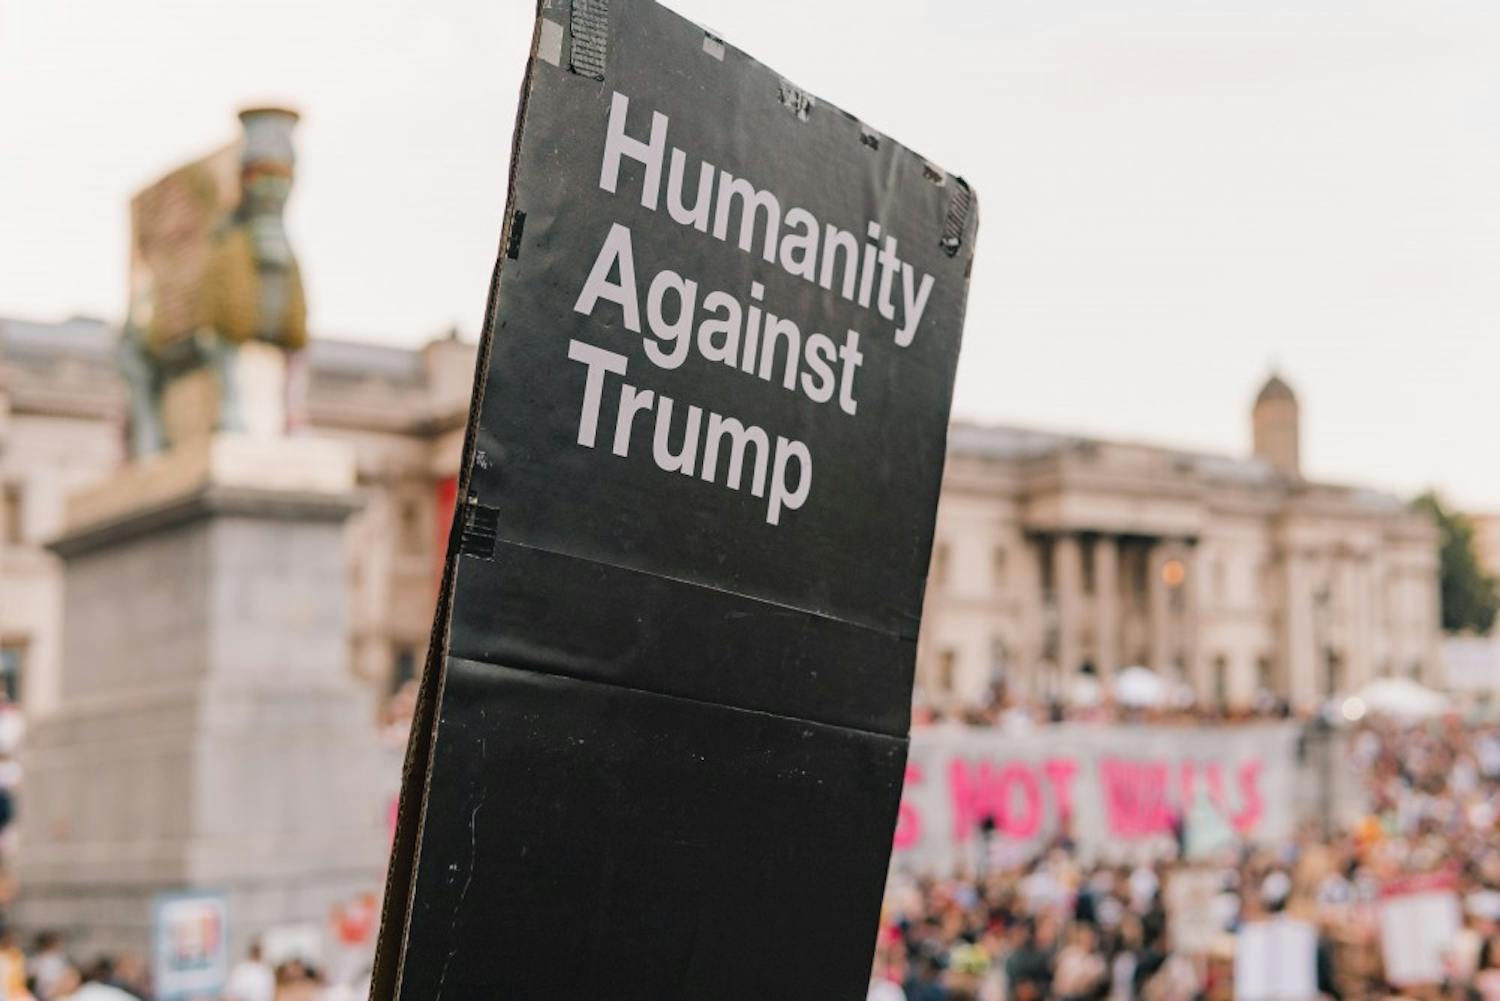 Humanity Against Trump protest sign